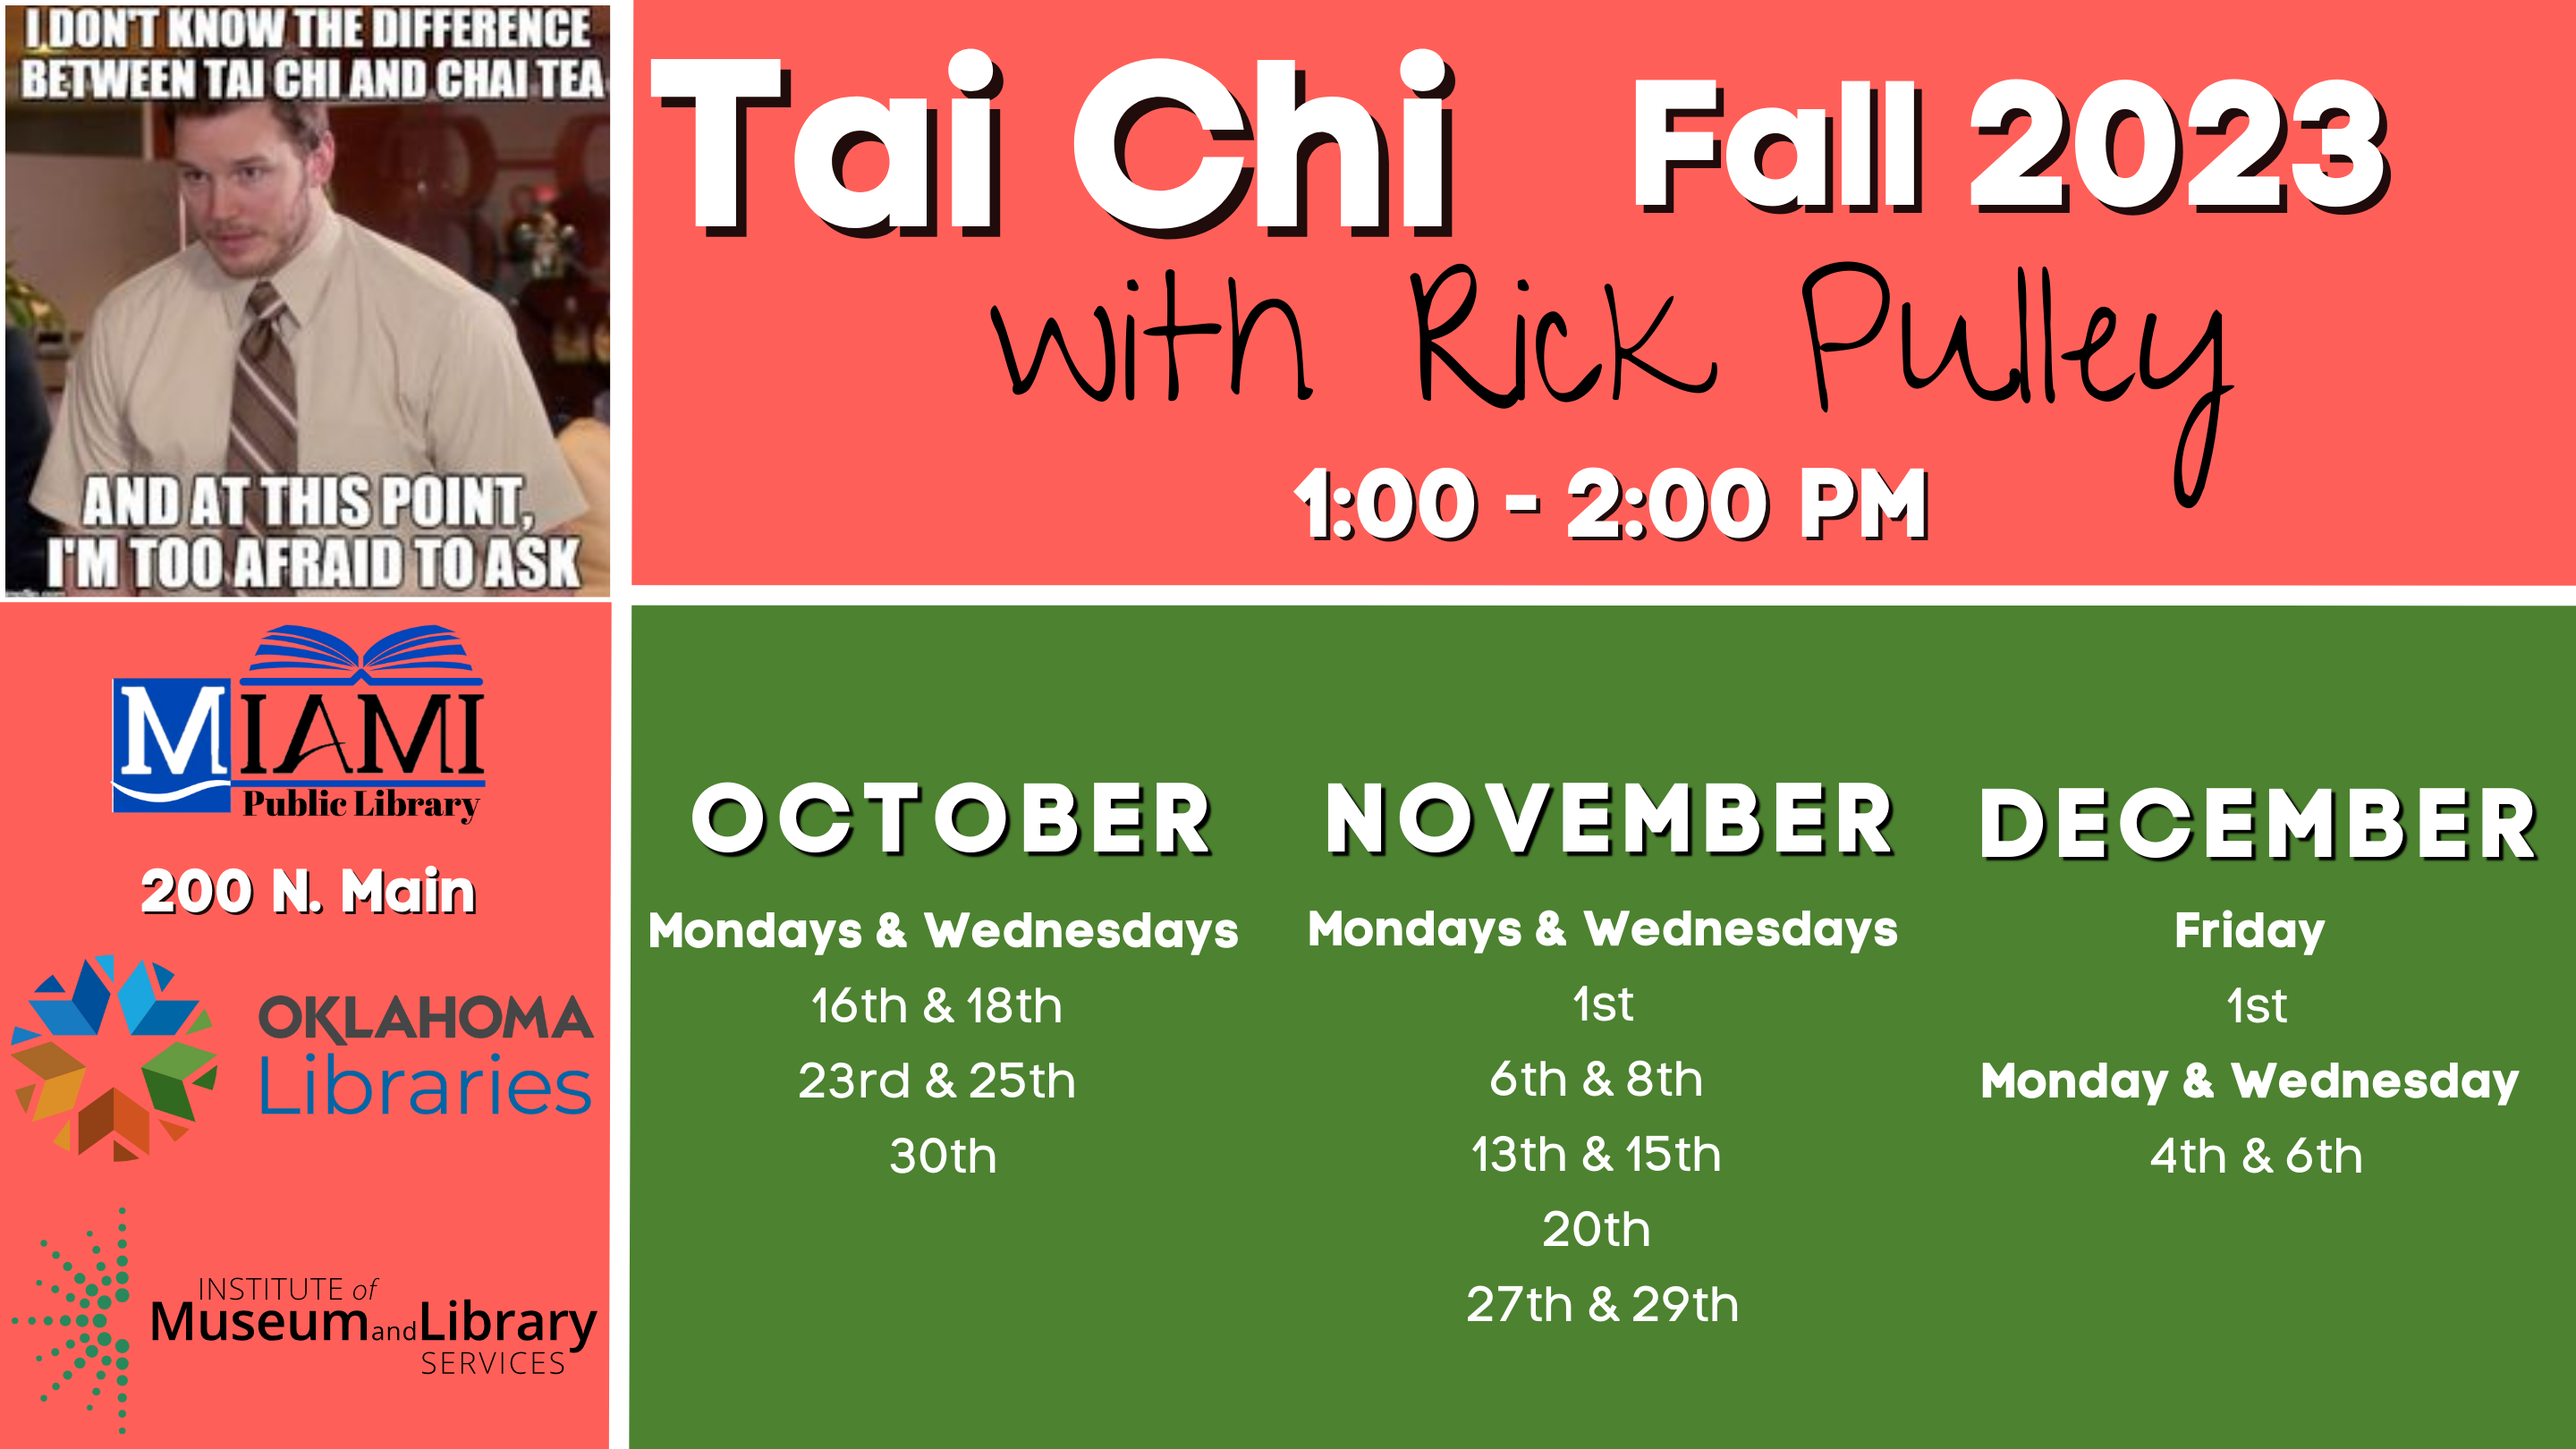 Click this image to be redirected to the Fall 2023 Tai Chi Event Facebook Page